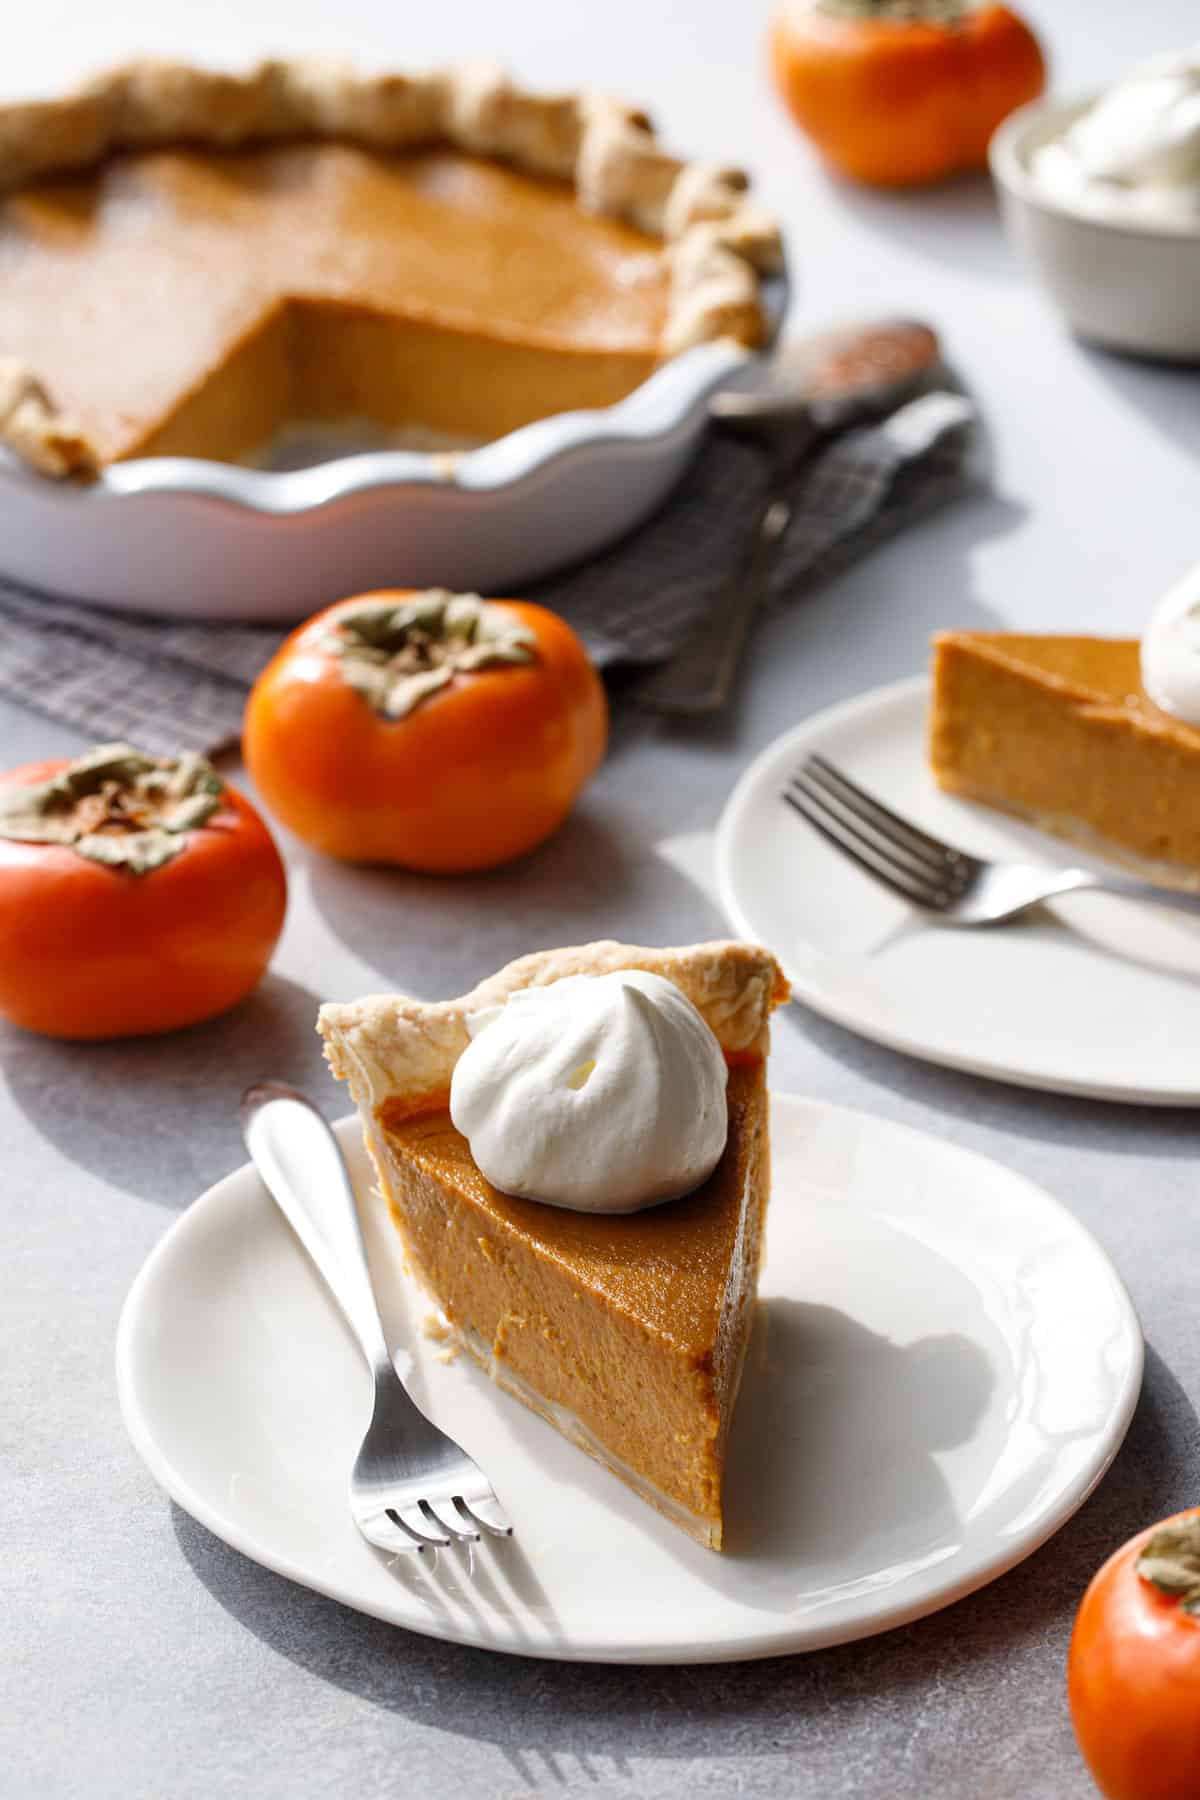 Slice of Persimmon Pie on a white plate with fork and perfect dollop of whipped cream on top; whole persimmons and the rest of the pie in the background.